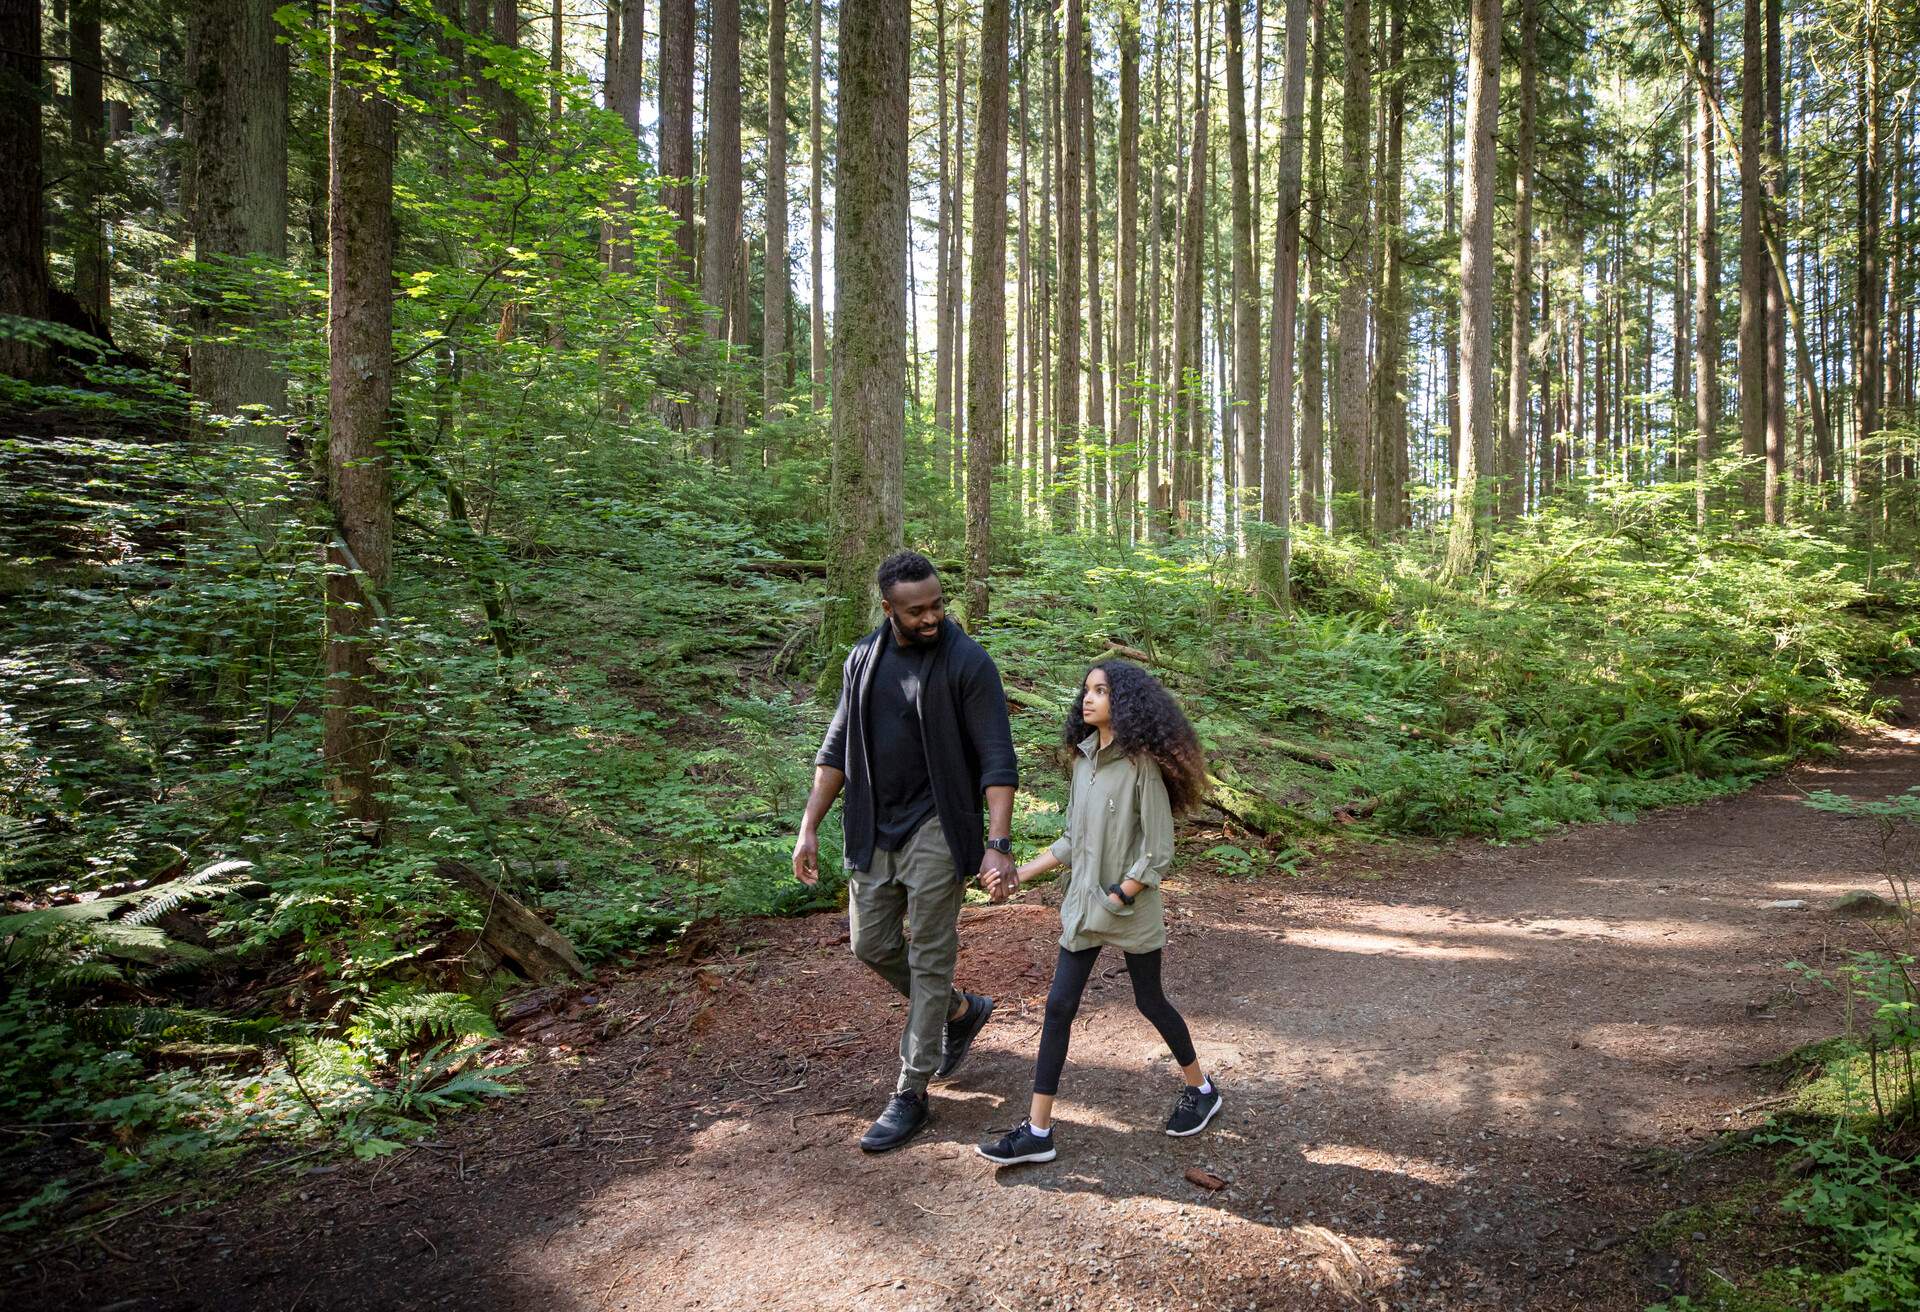 CANADA_NORTH_VANCOUVER_BRITISH_COLUMBIA_PEOPLE_MAN-KID_GIRL_FOREST_HIKE